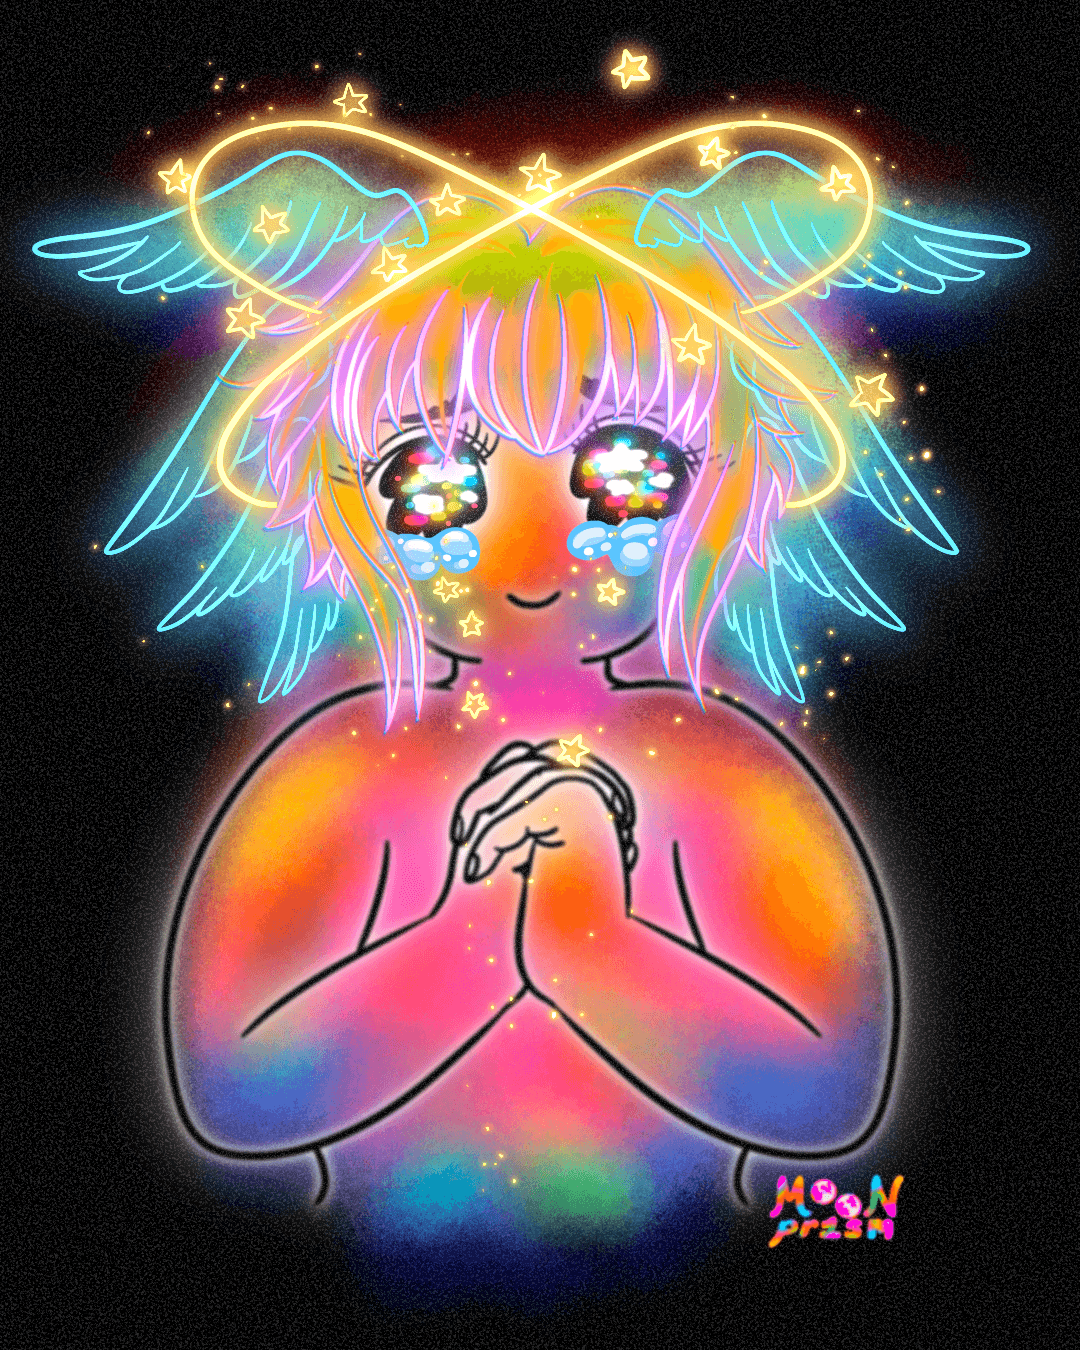 An illustration of a character with large eyes and a small smile. They appear to be made entirely of various neon colors and light. They have 8 blue wings on their head, and a spiraling gold halo of stars. They seem to be crying happy tears of golden stars with hands clasped in, perhaps, prayer.